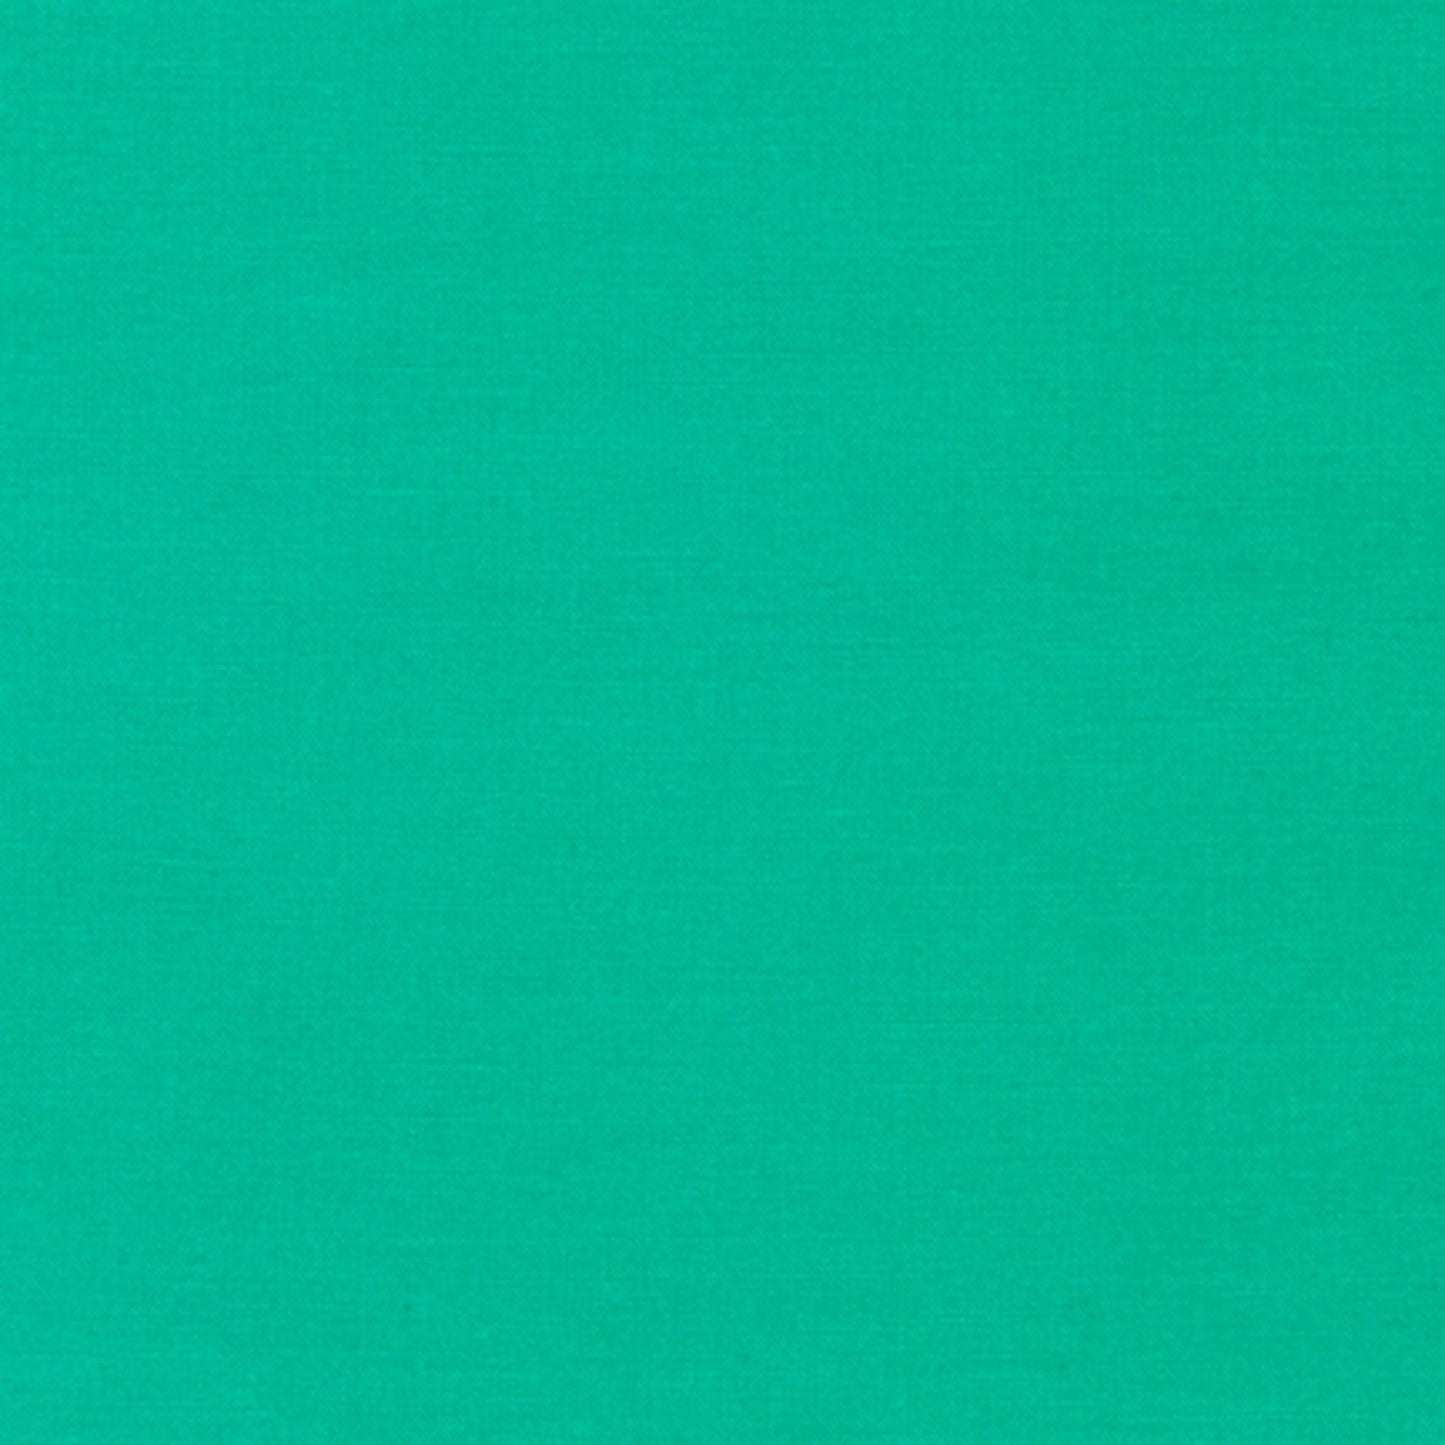 Kona Cotton Solids Kale fabric thumbnail image for true color reference